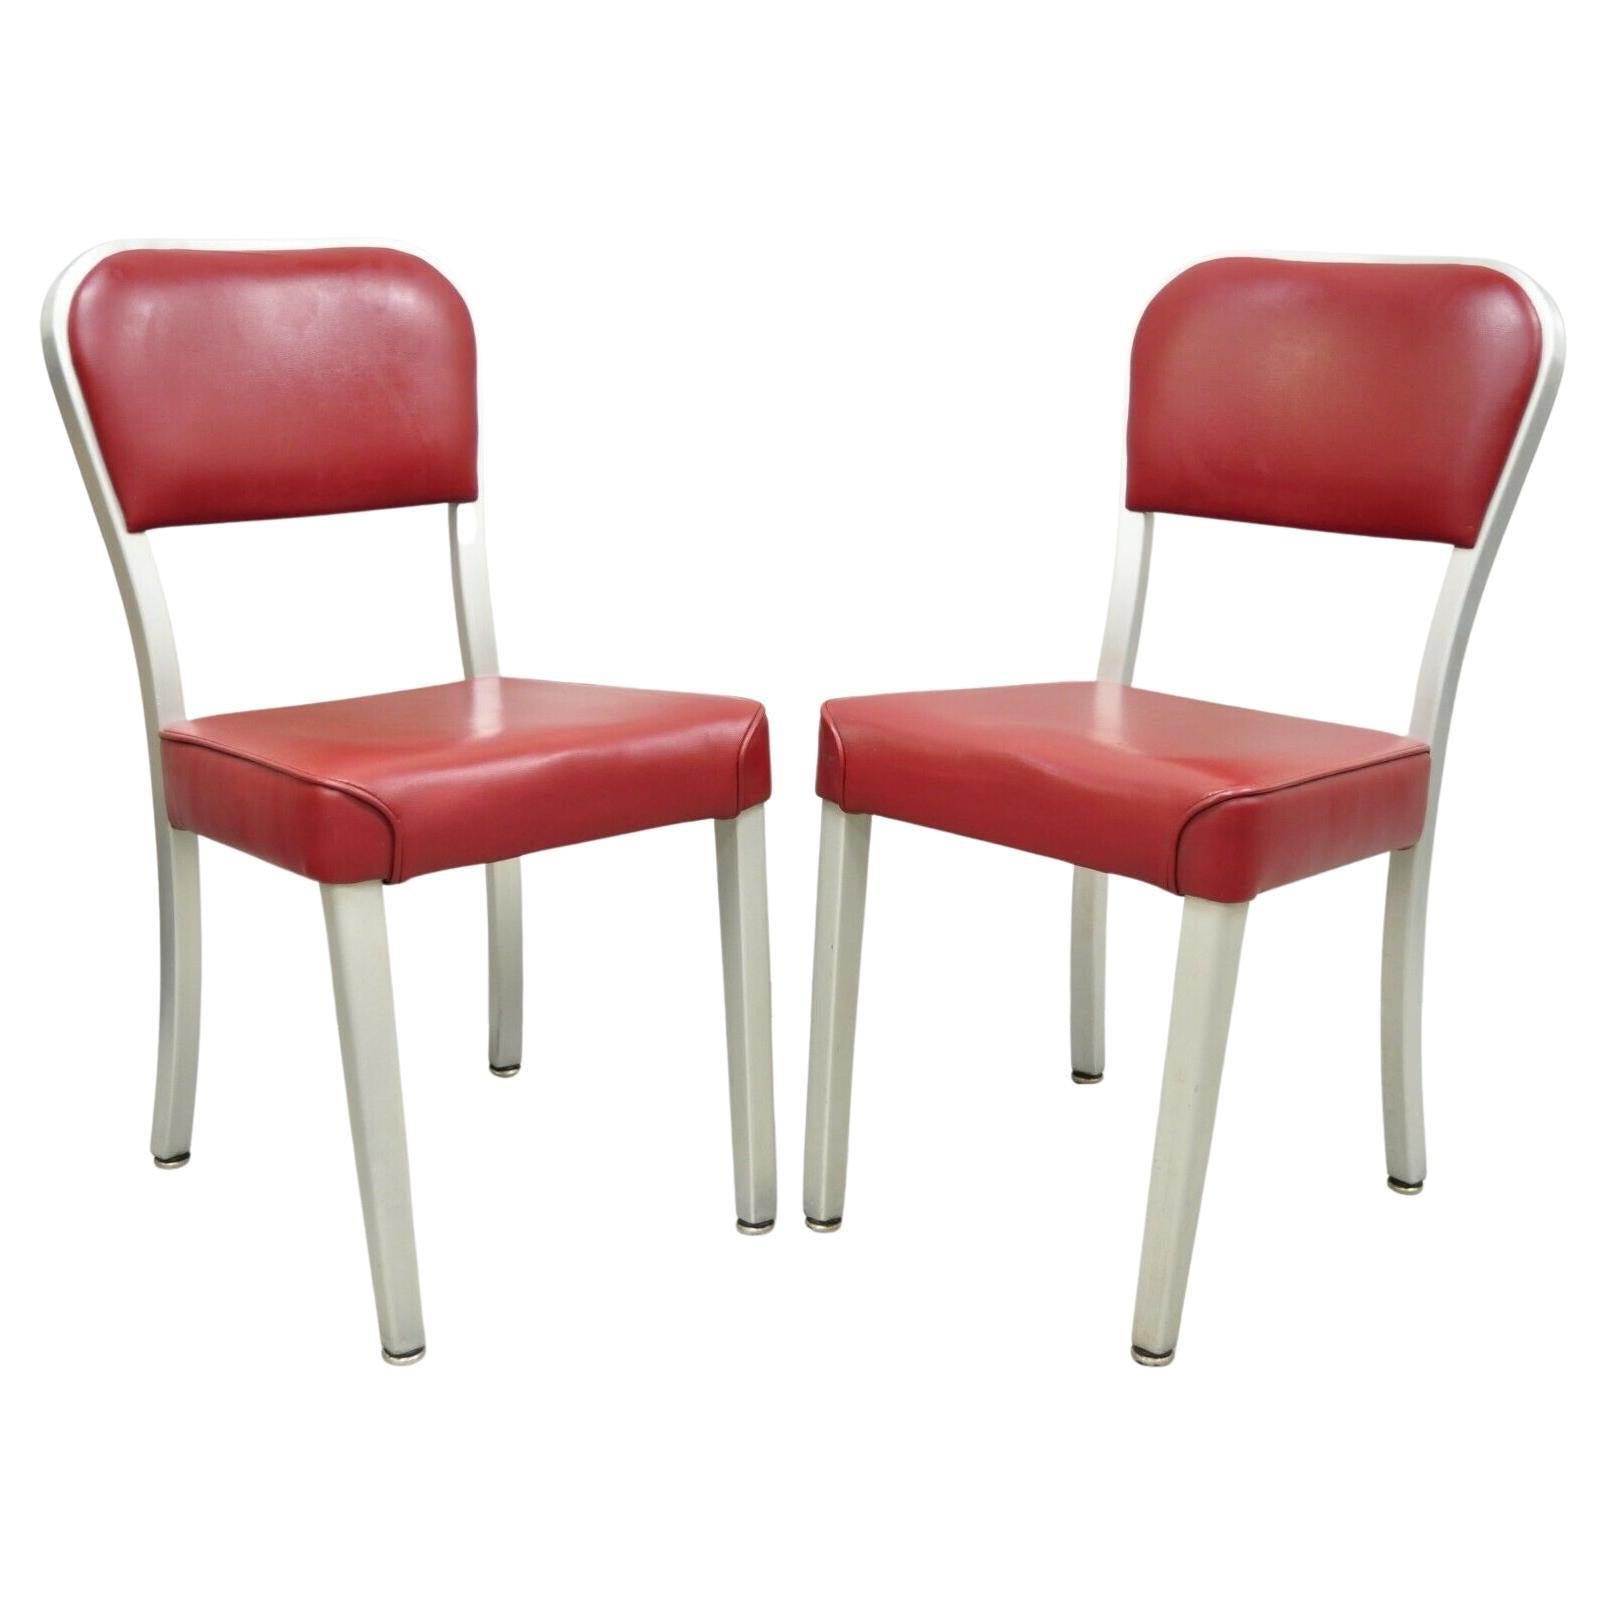 Vintage Brushed Aluminum Red Upholstered Emeco Navy Style Side Chairs, a Pair For Sale